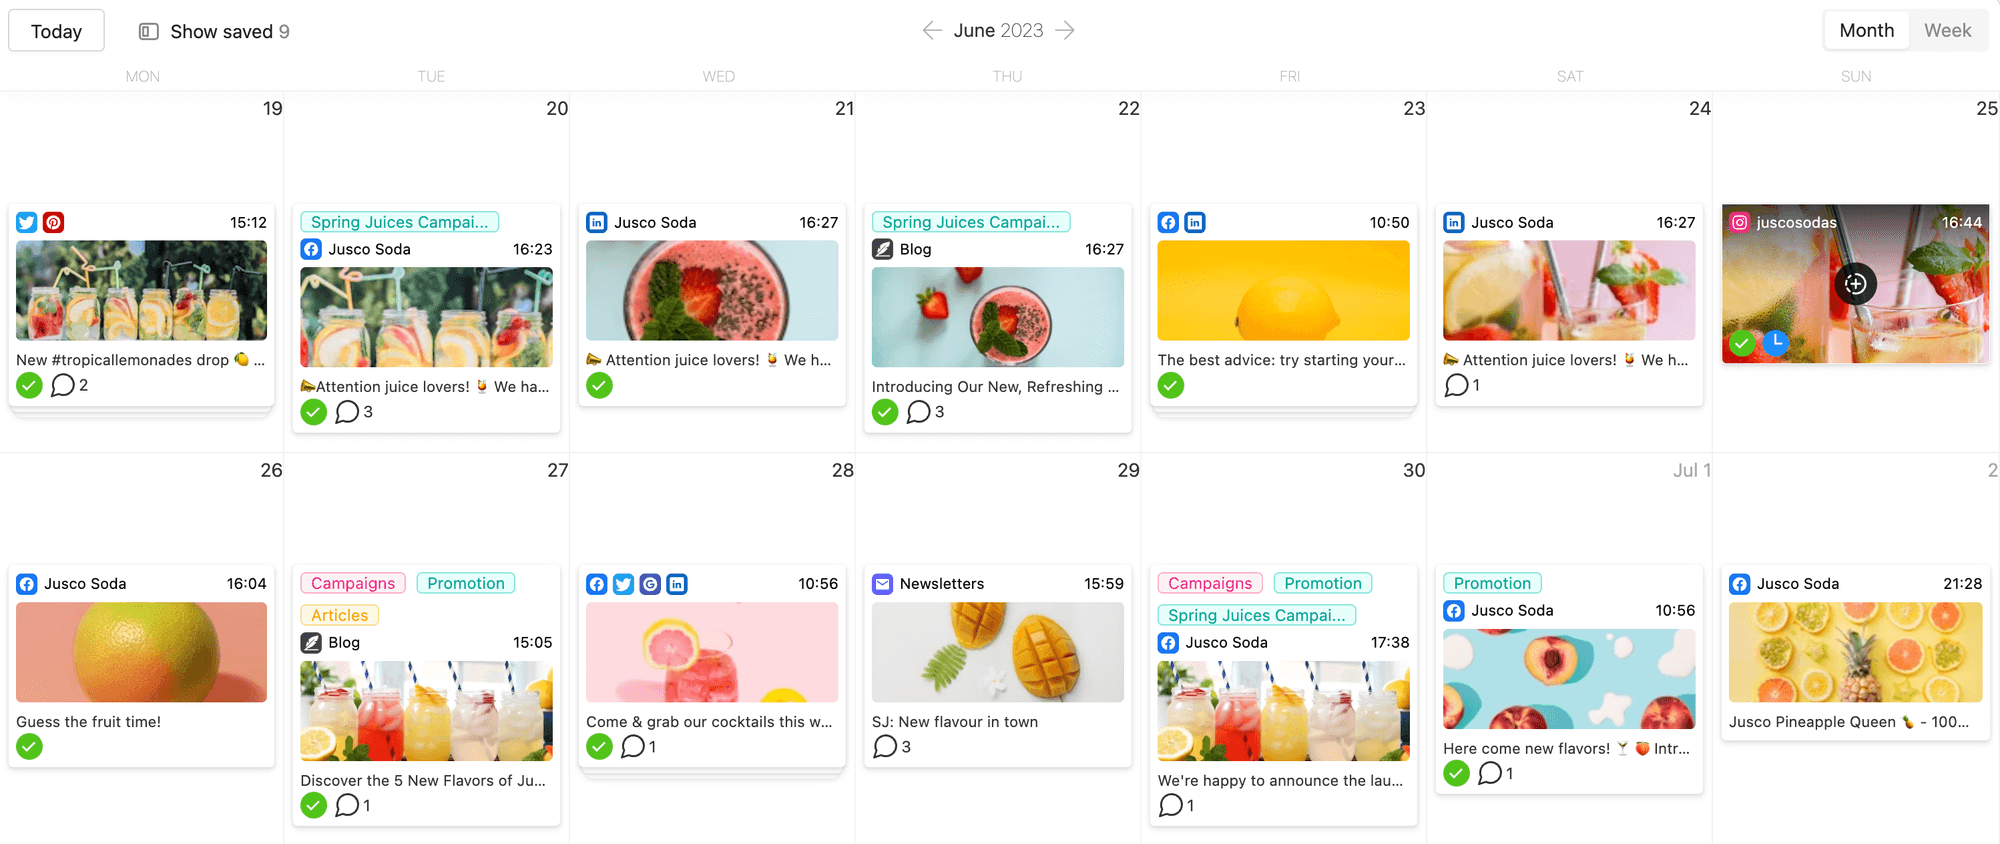 Planable's content calendar for June for both social media posts and blog